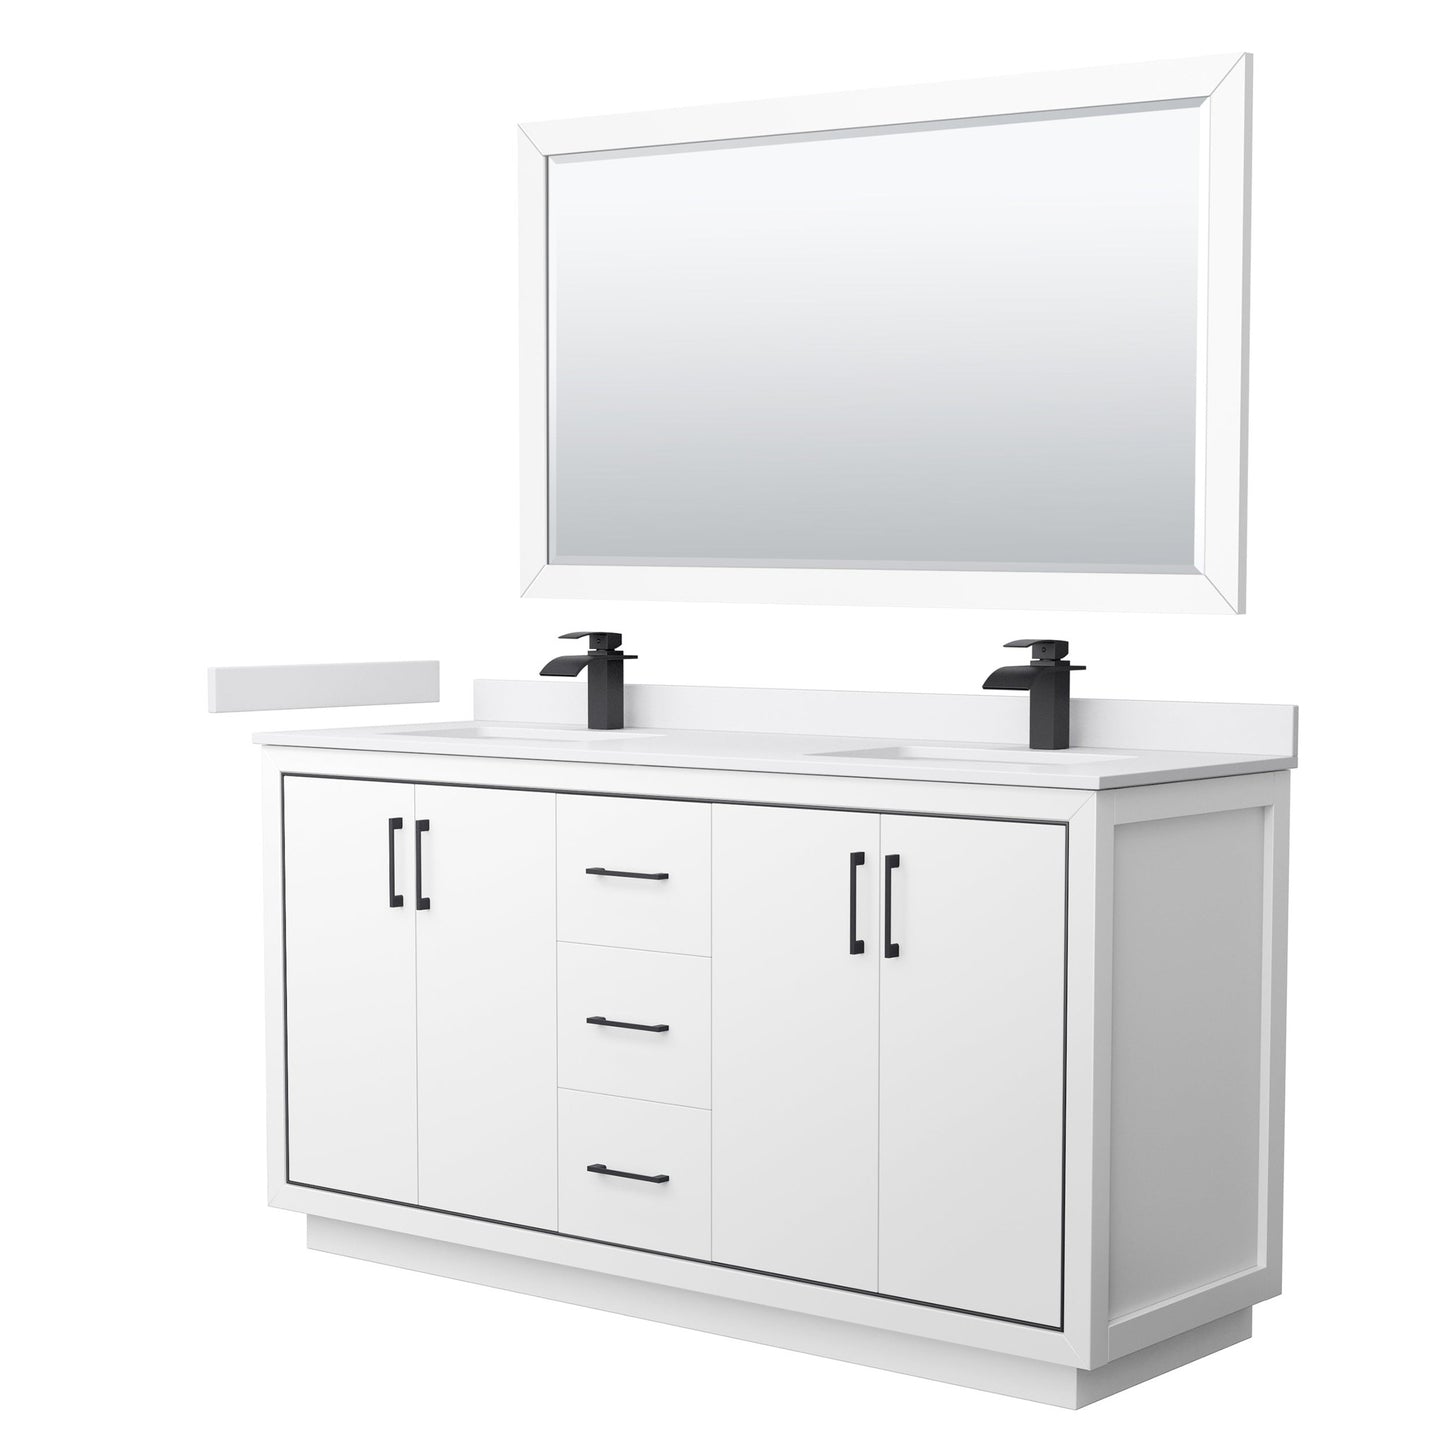 Wyndham Collection Icon 66" Double Bathroom Vanity in White, White Cultured Marble Countertop, Undermount Square Sinks, Matte Black Trim, 58" Mirror